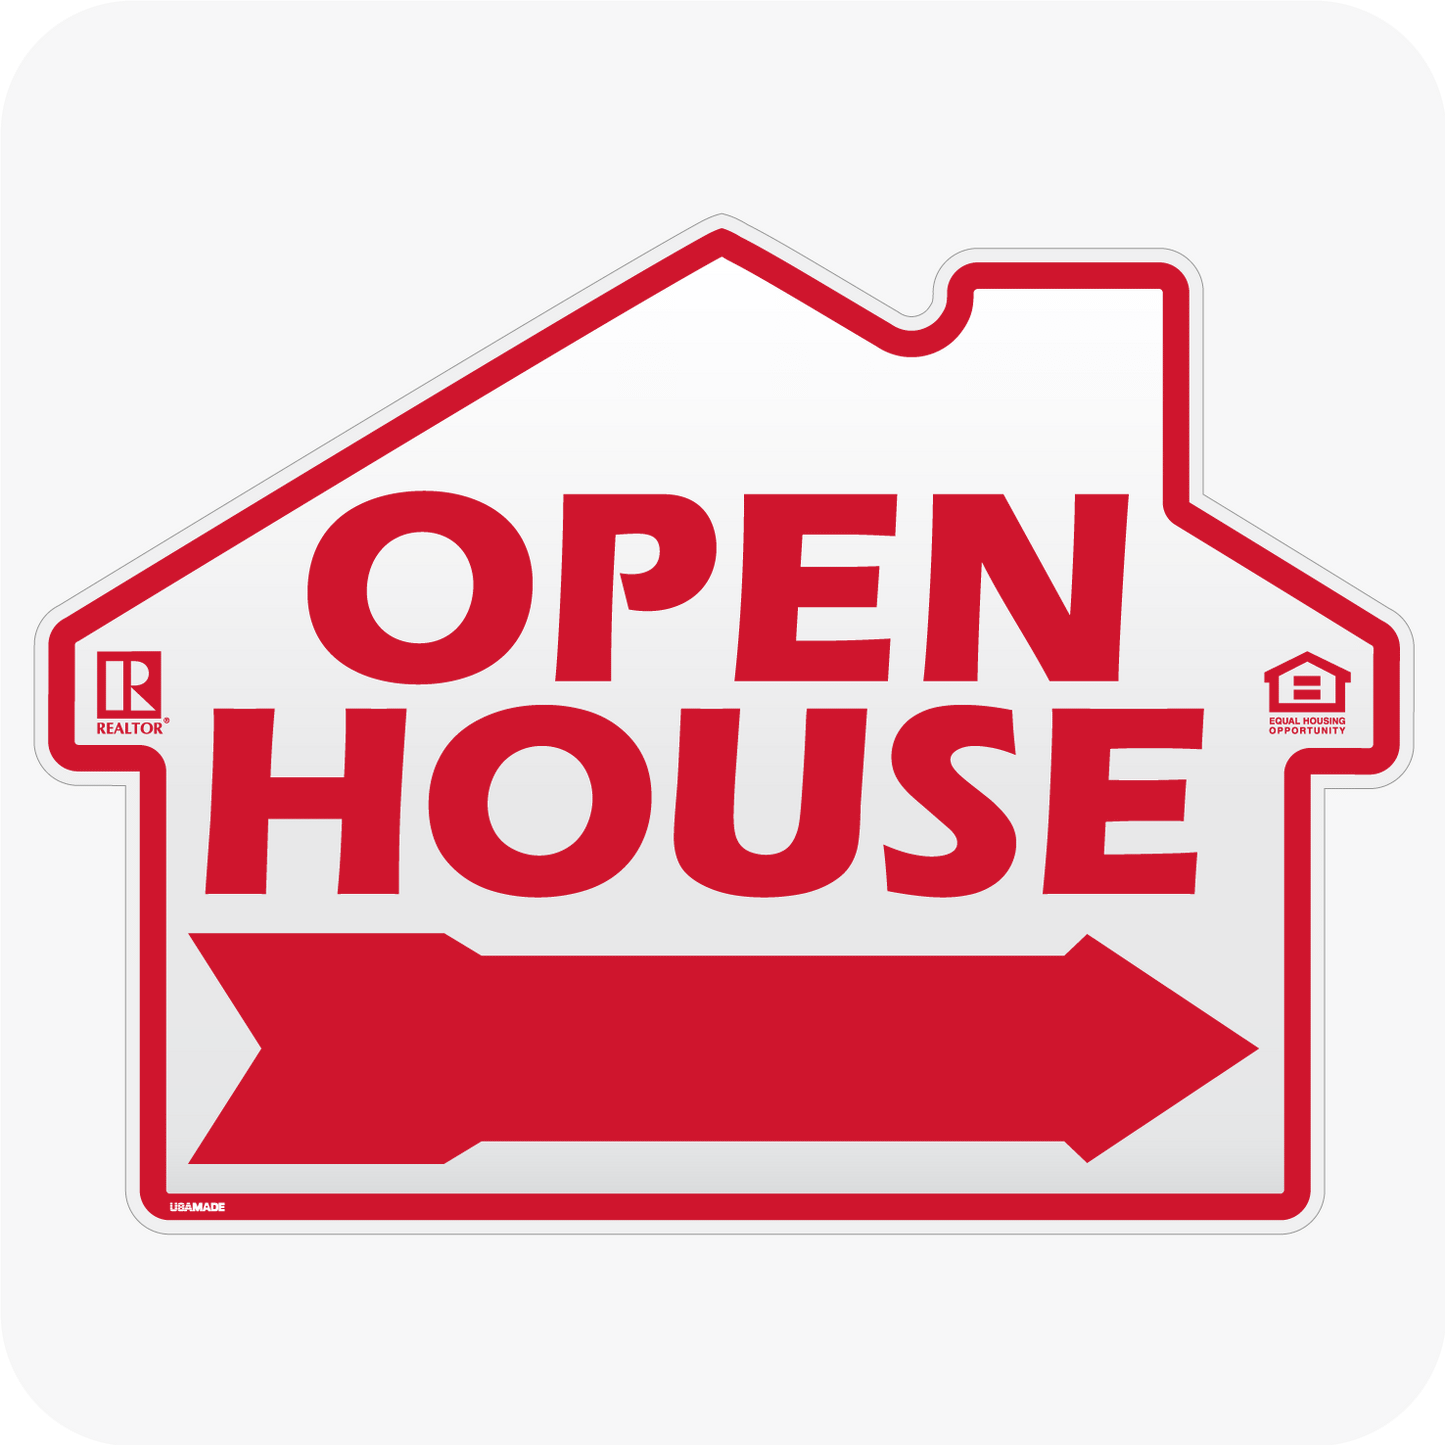 Open House 18 x 24 House Shaped Sign w/Realtor Logo - Red